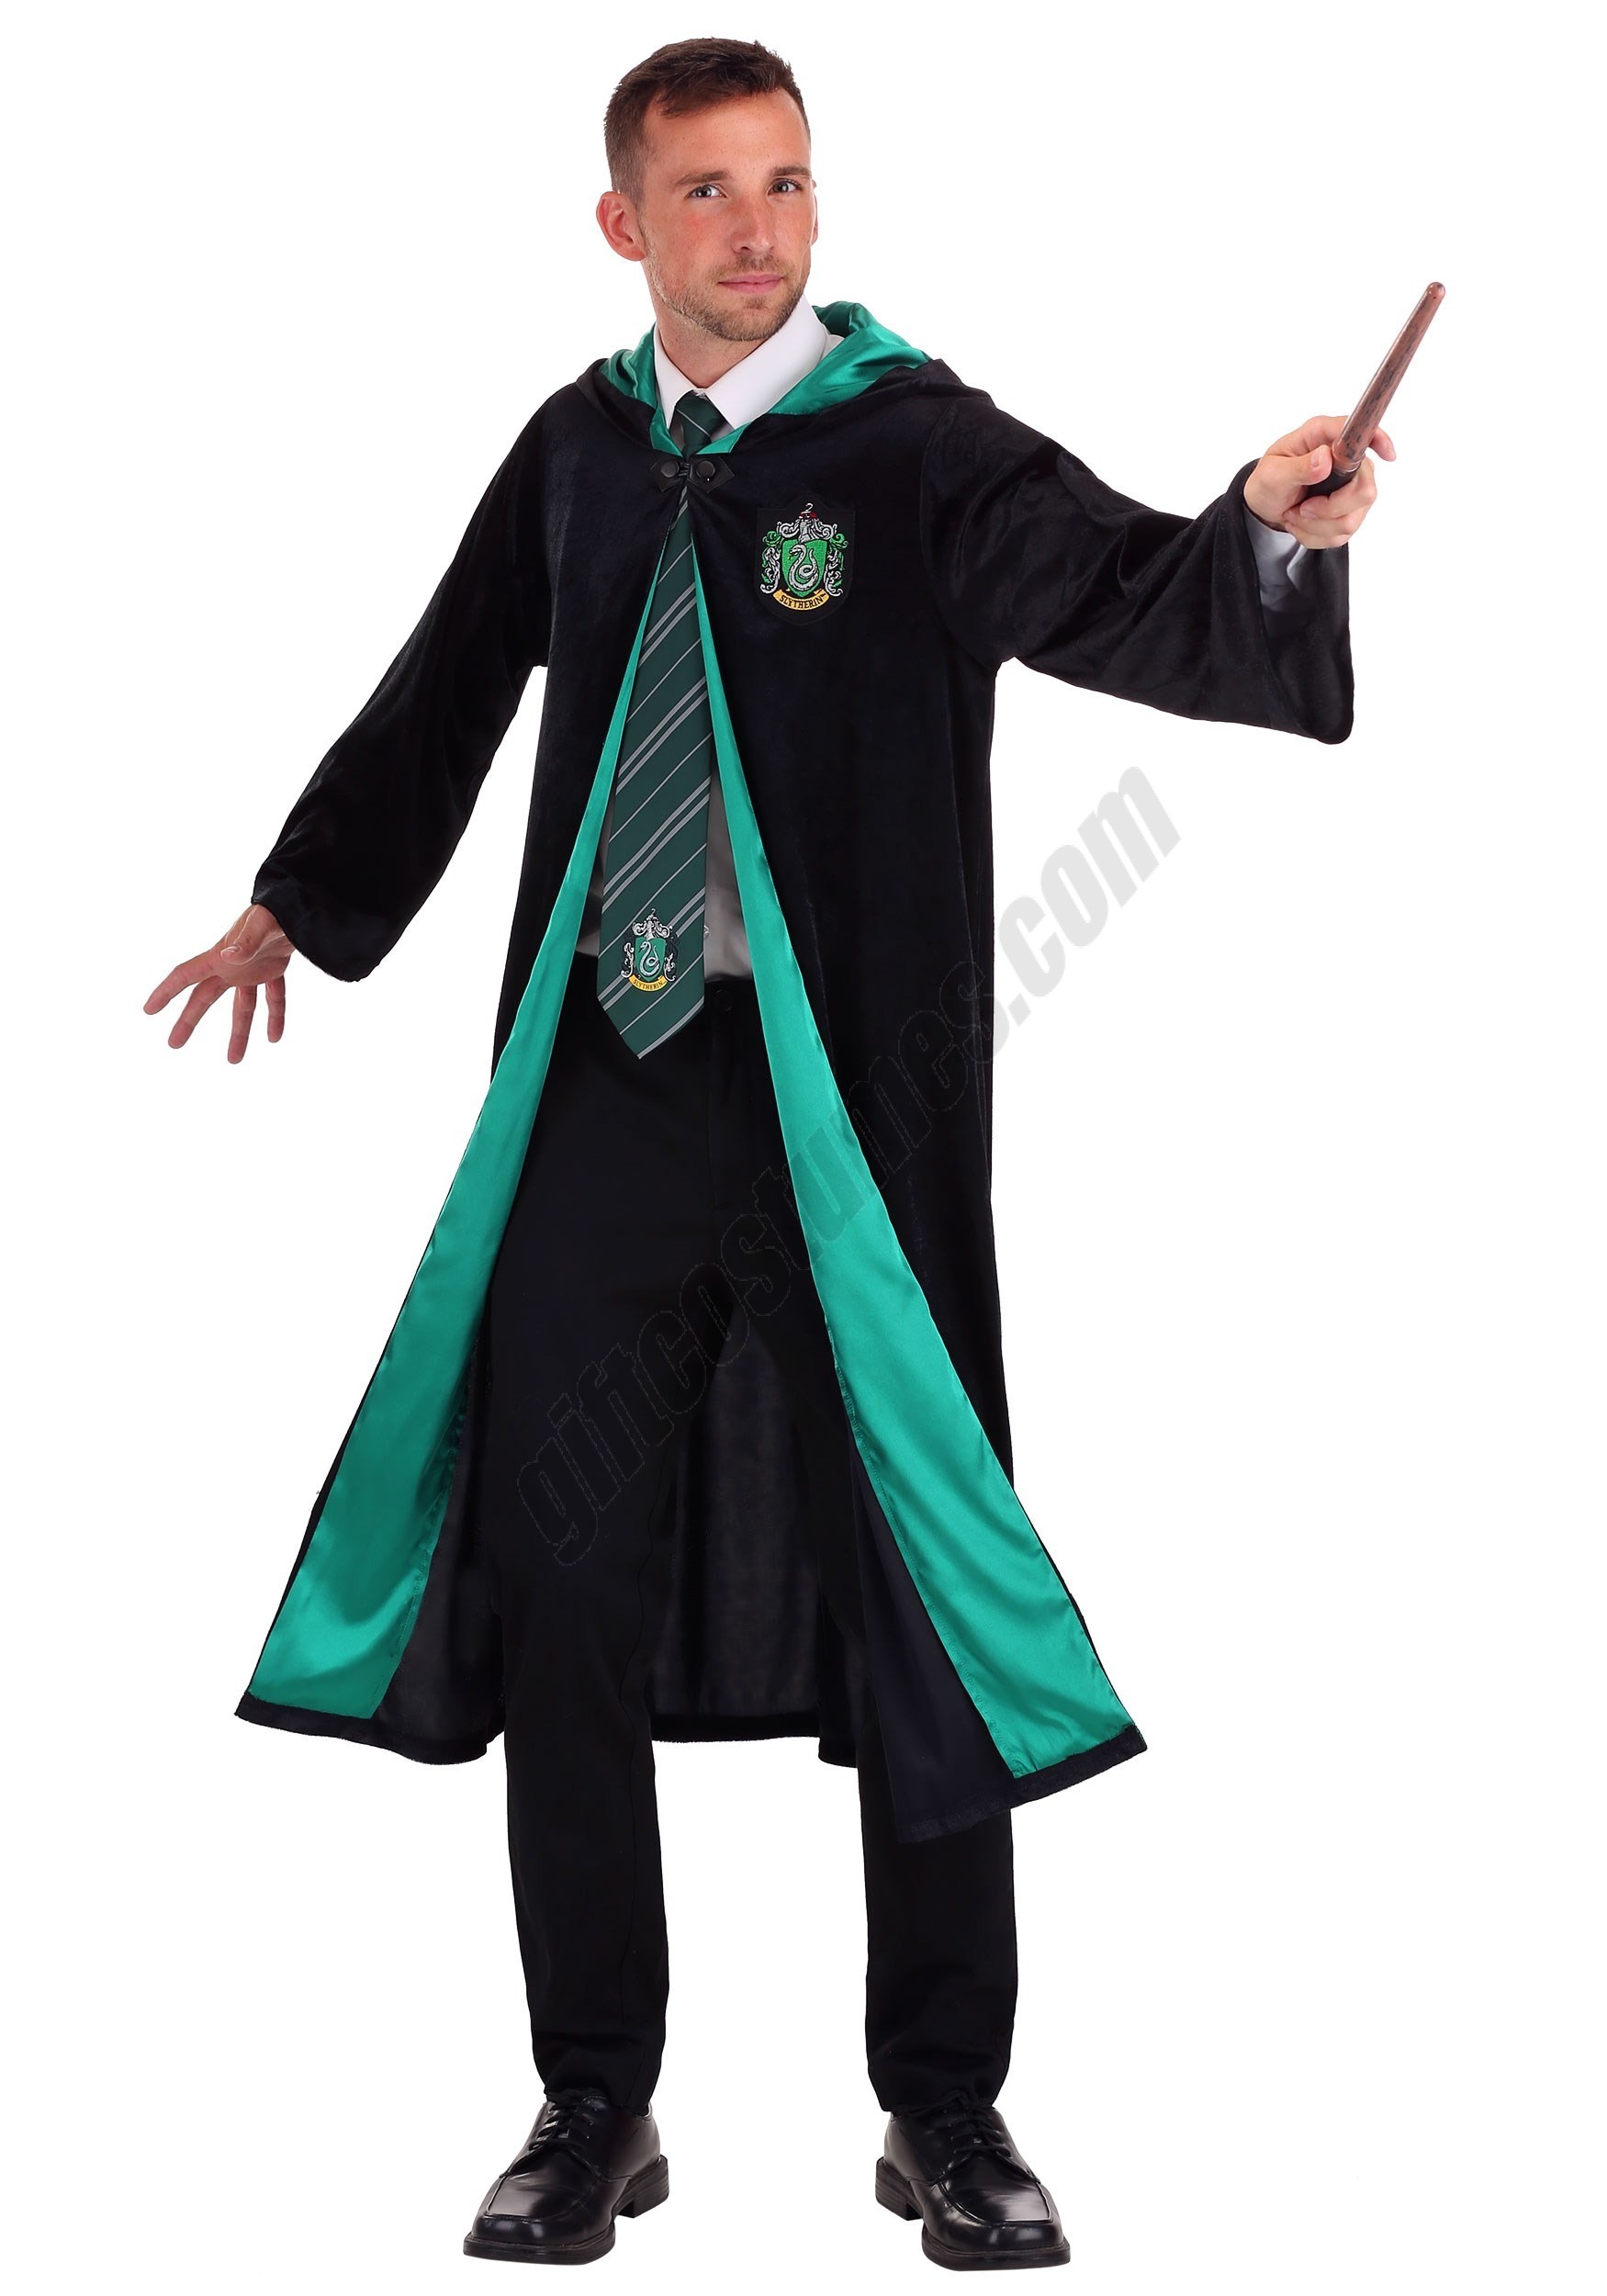 Deluxe Harry Potter Slytherin Adult Plus Size Robe Costume Promotions - Deluxe Harry Potter Slytherin Adult Plus Size Robe Costume Promotions